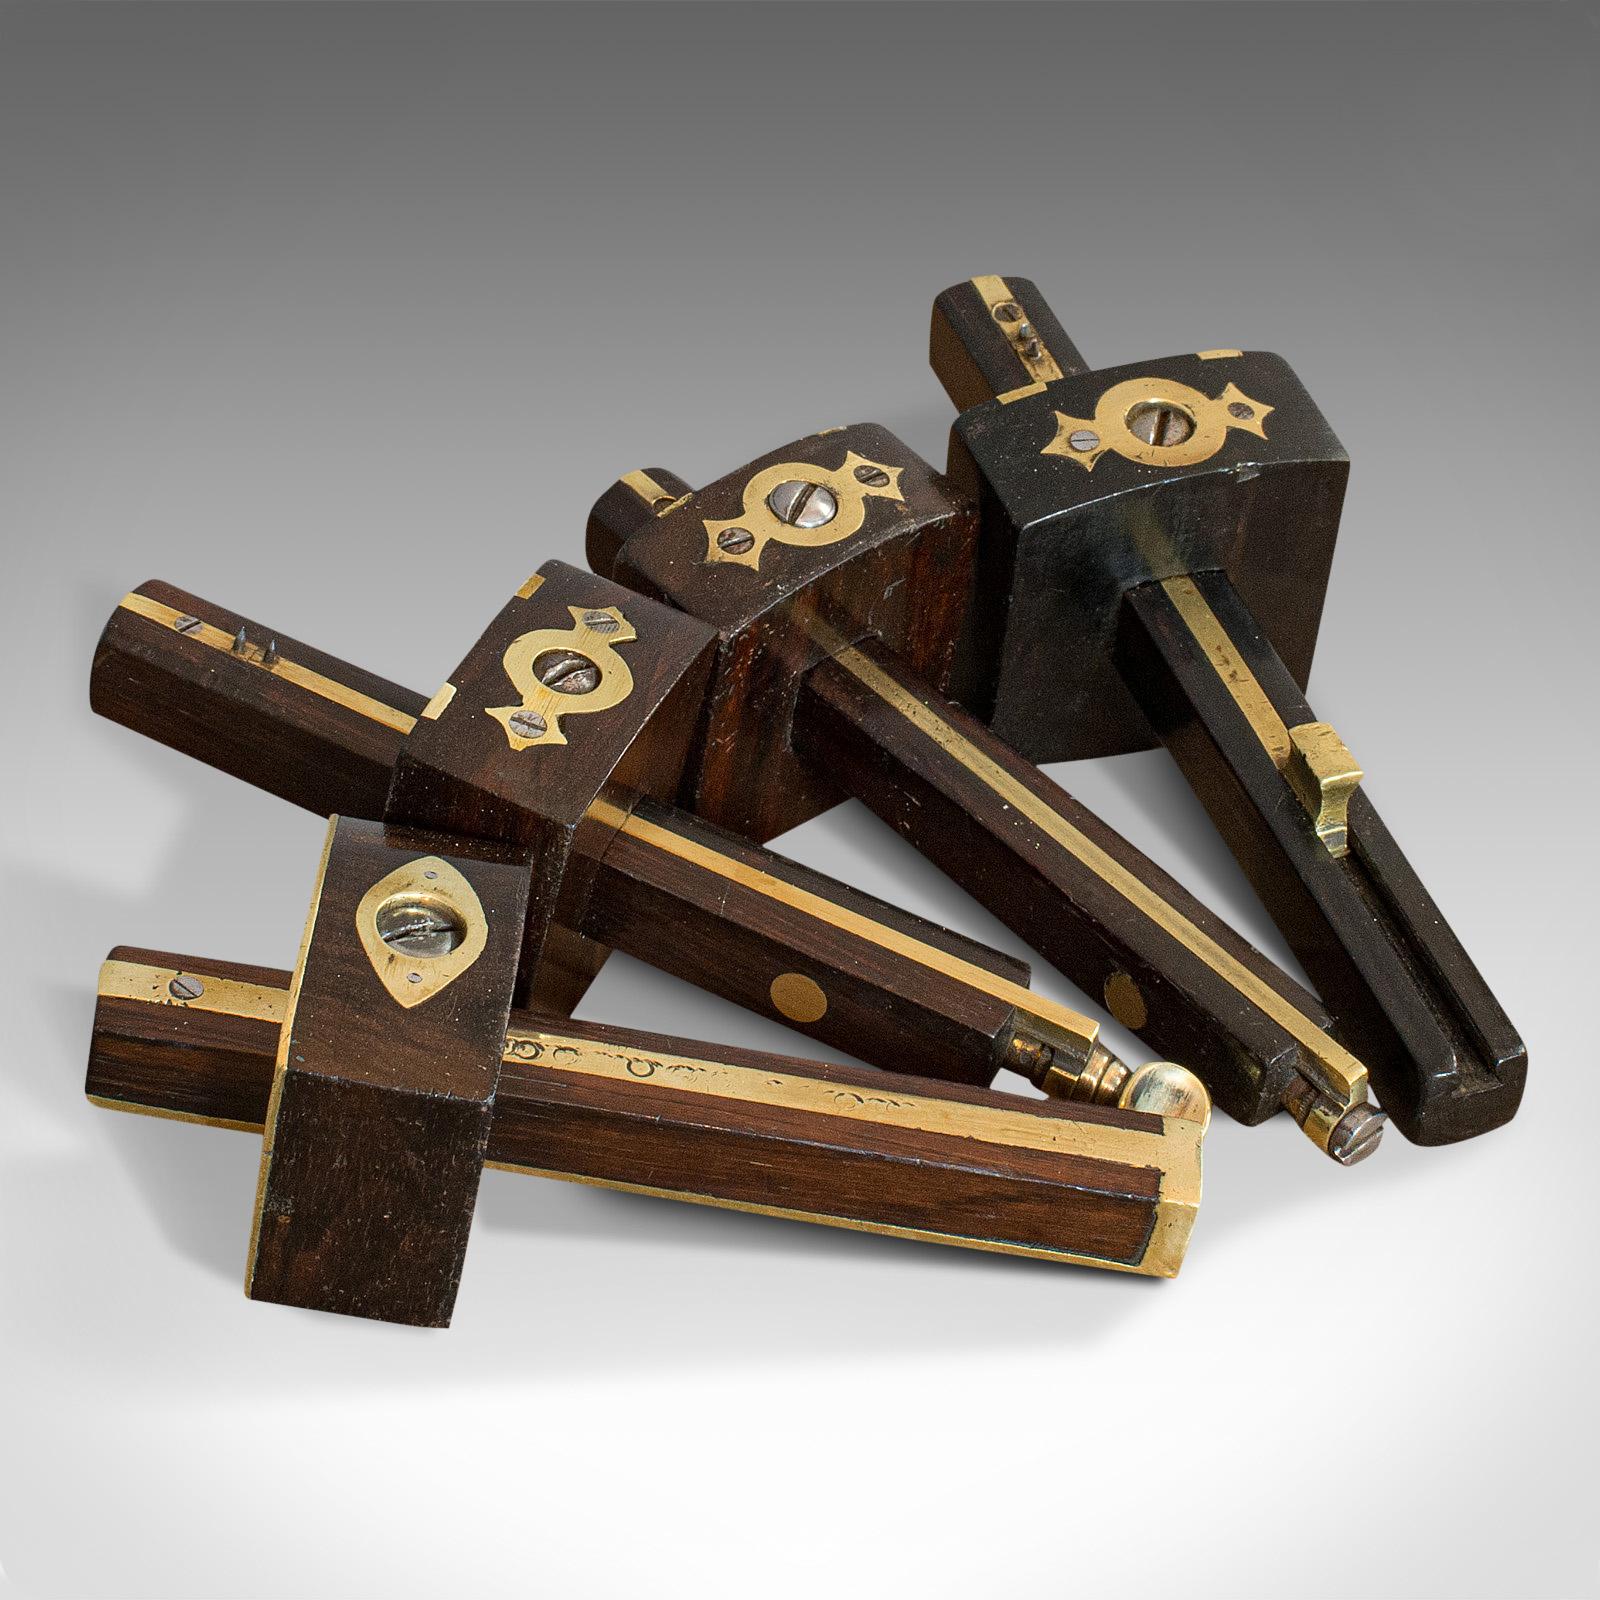 This is a set of vintage mortise gauges. 4 English, rosewood and brass carpenter's tools, dating to the mid-20th century, circa 1950.

Fascinating midcentury craftsman's tools
Displaying a desirable aged patina
Rosewood shows fine grain